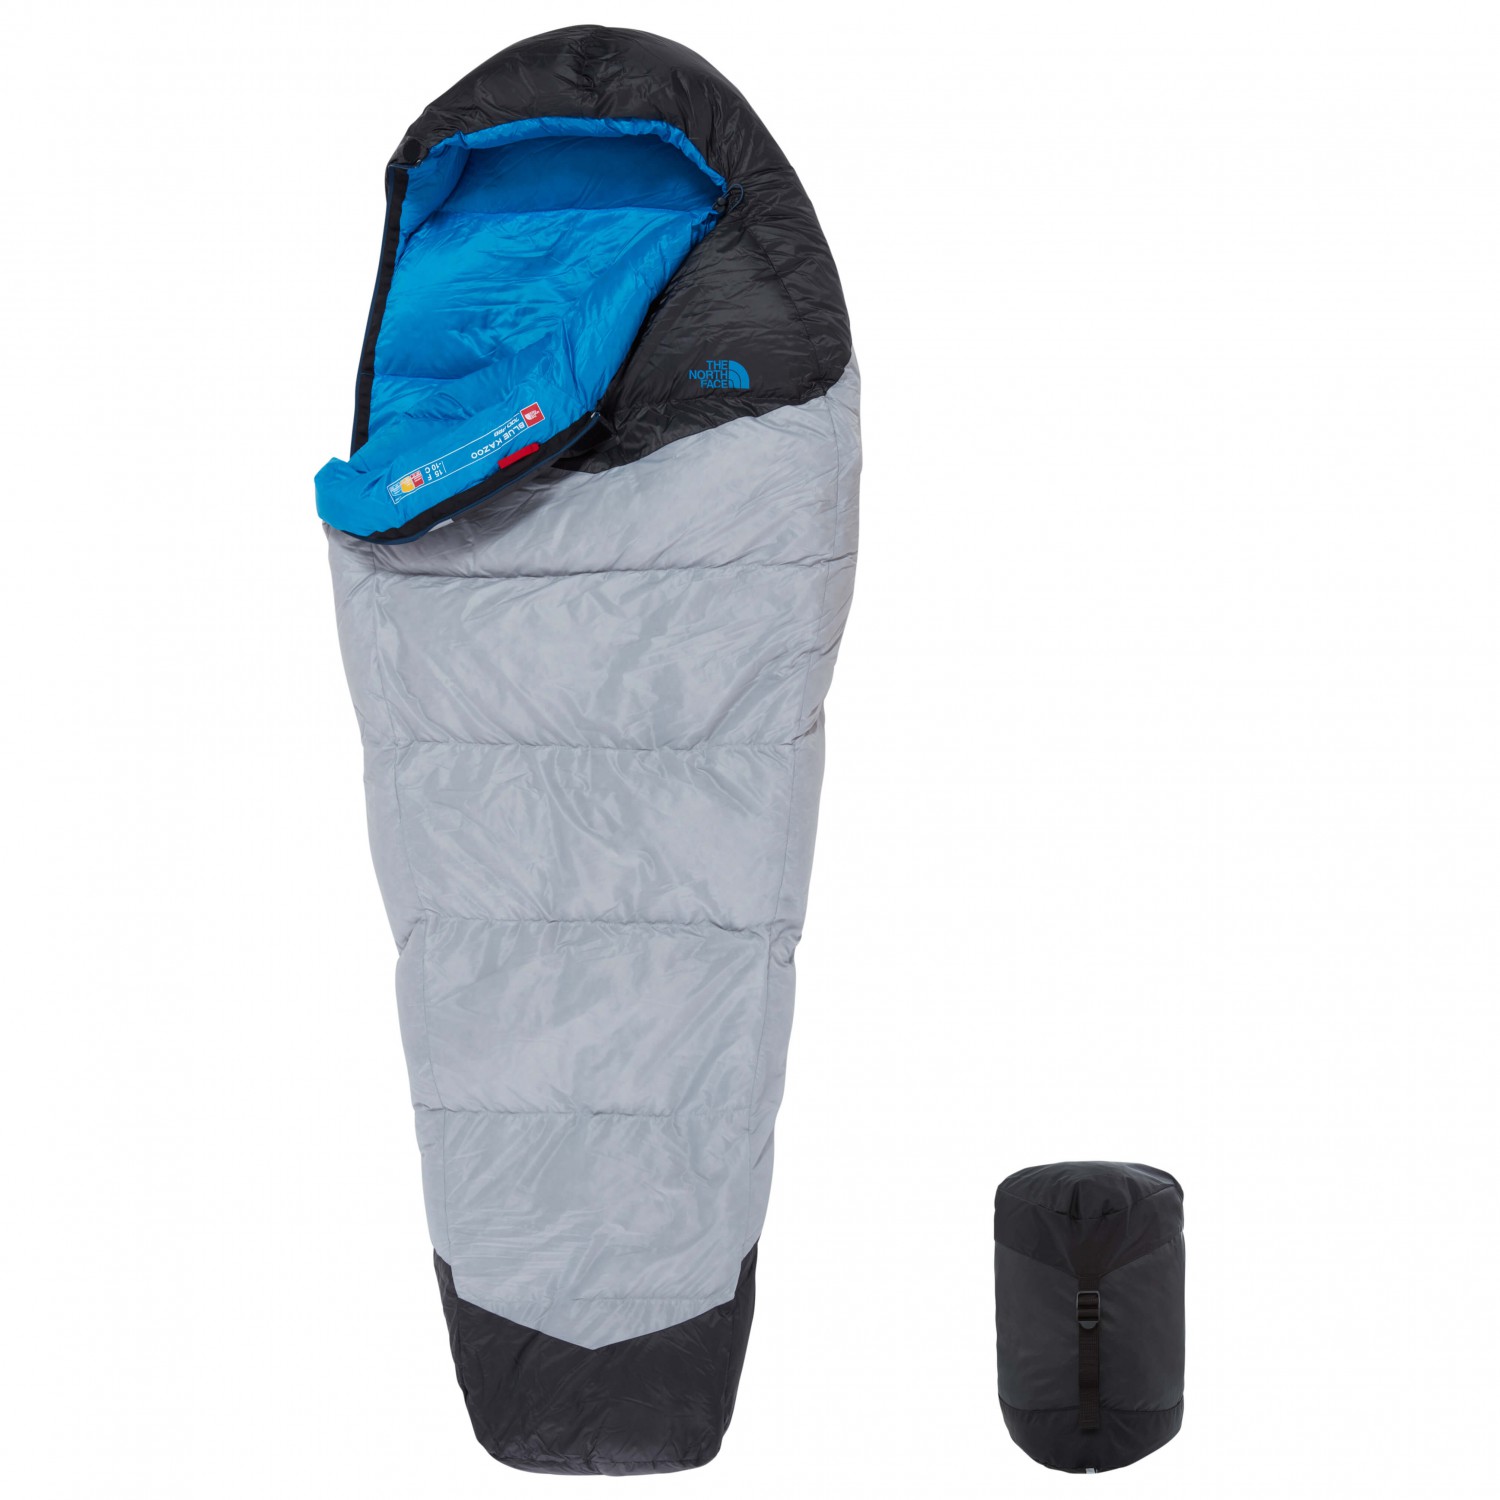 north face blue kazoo review